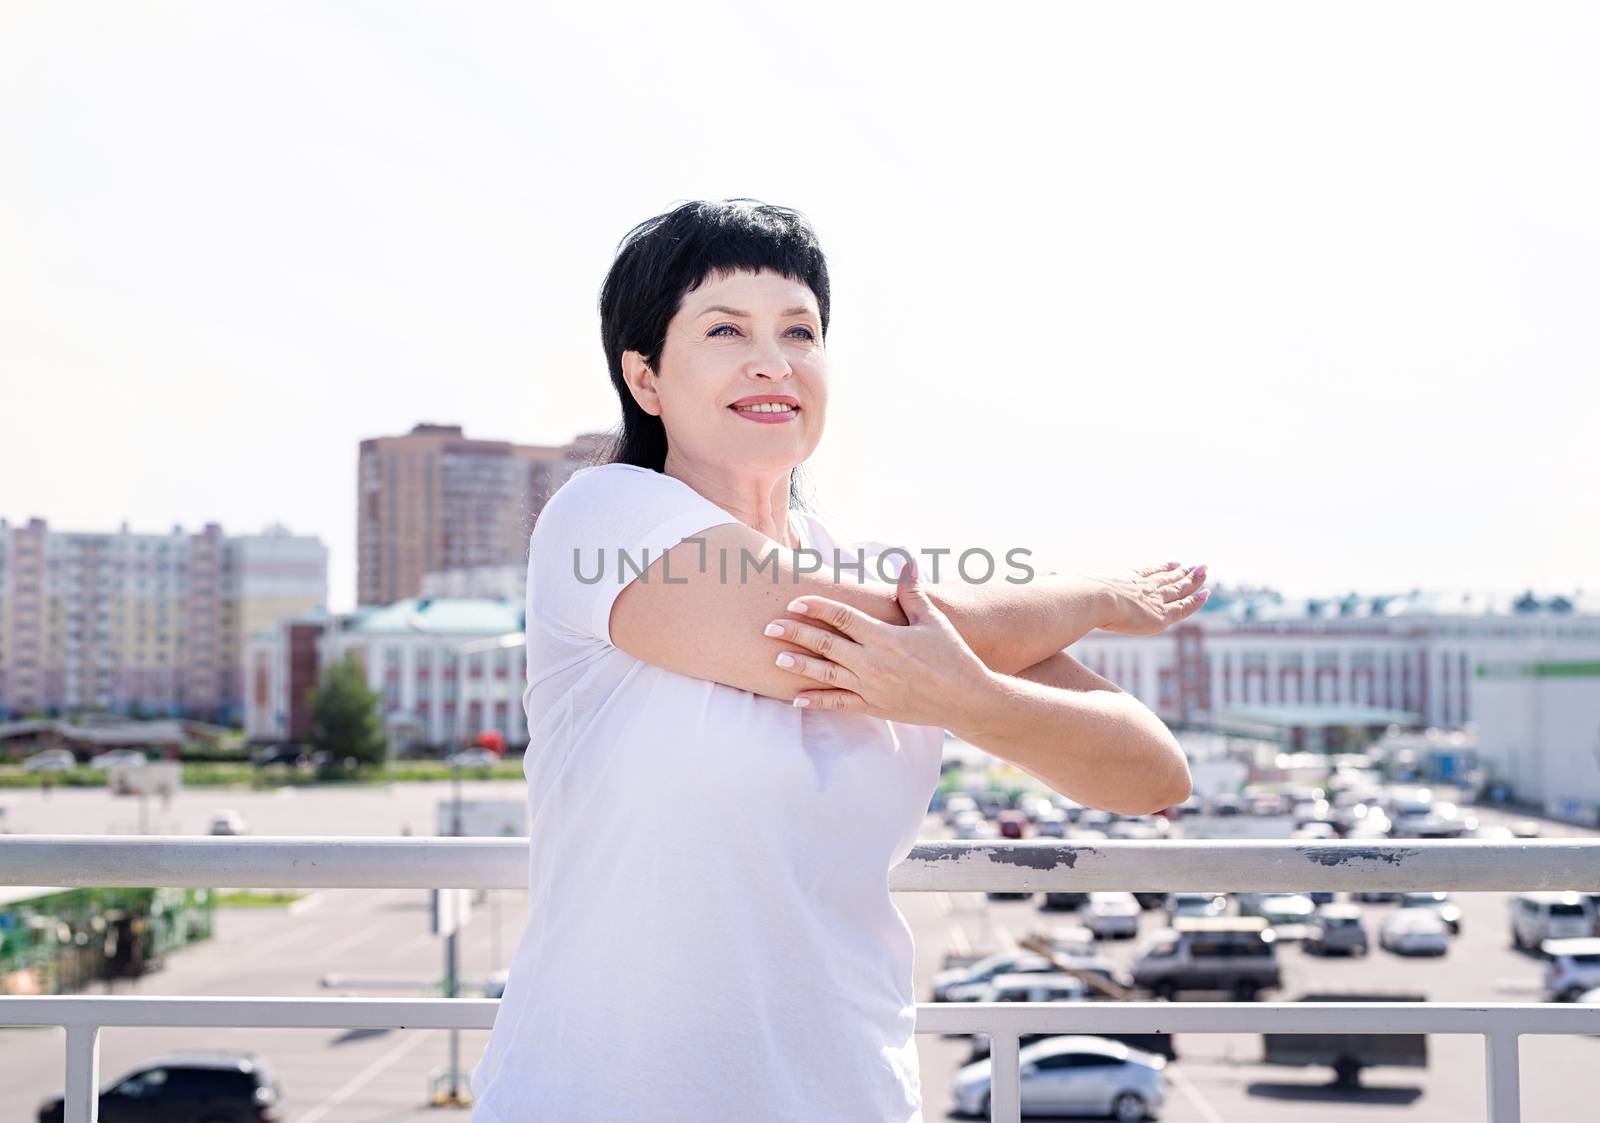 Sport and fitness. Senior sport. Active seniors. Smiling senior woman doing stretching outdoors on urban background